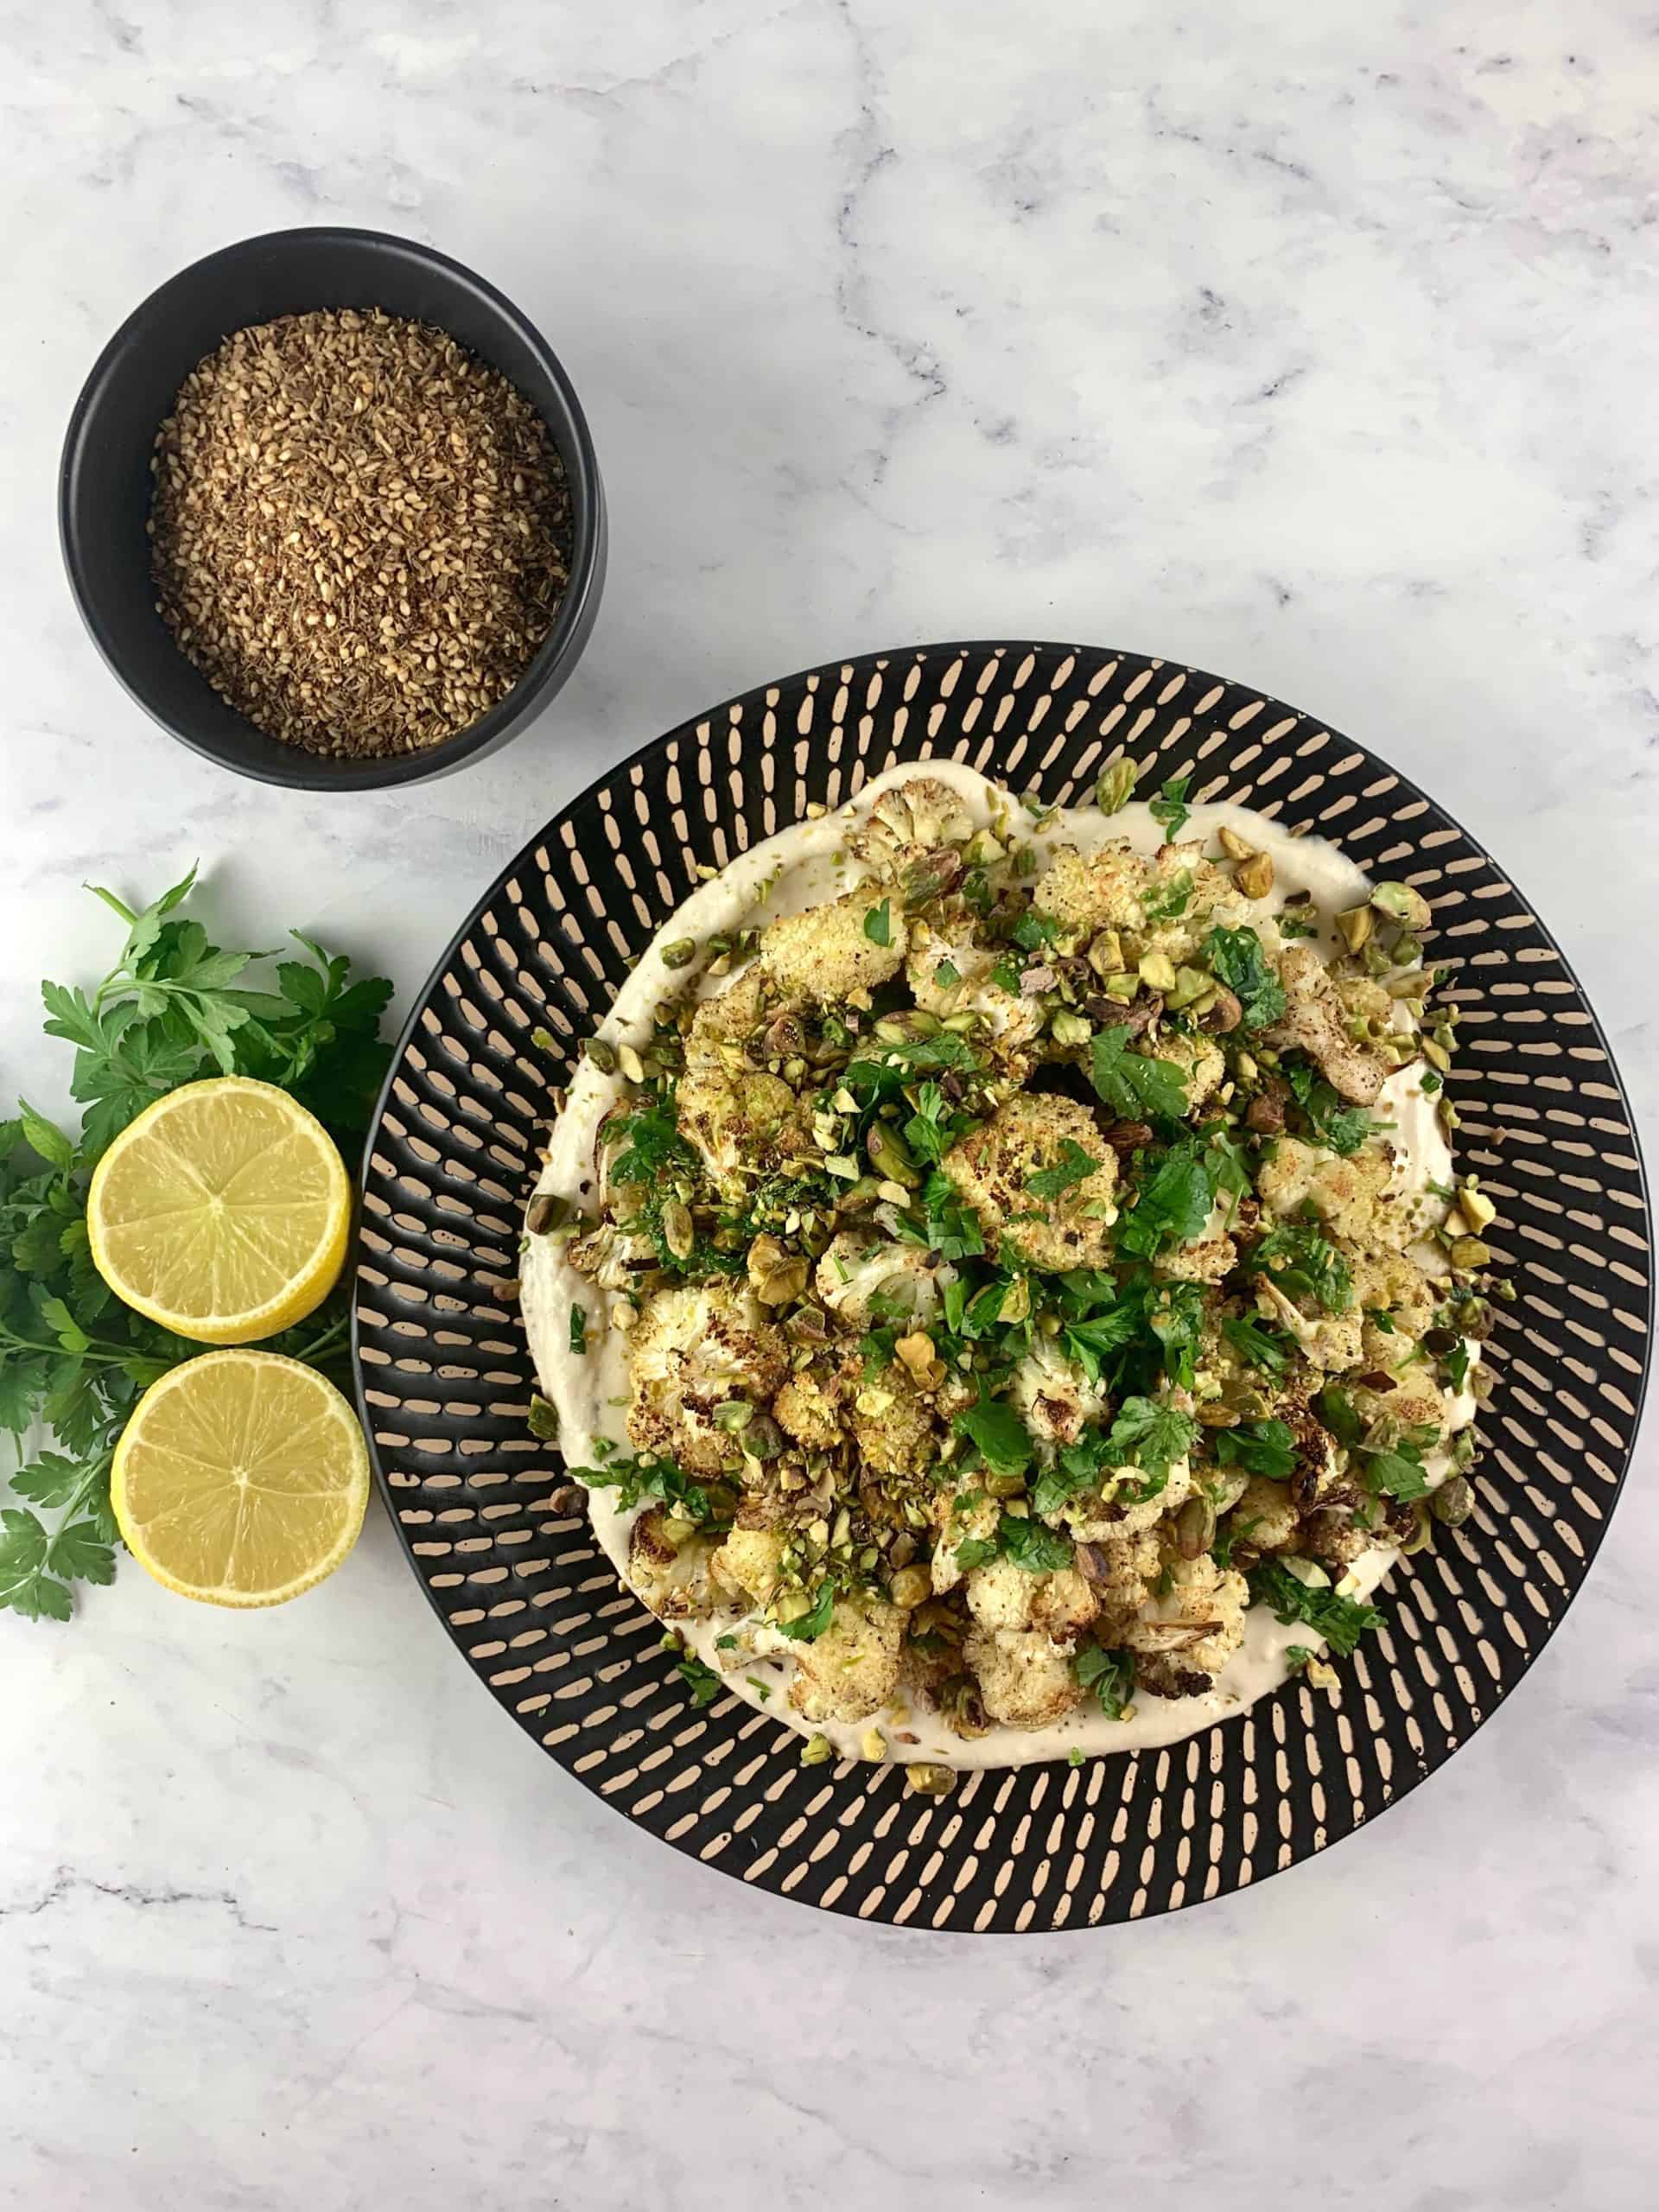 CAULIFLOWER TAHINI SALAD ON A BLACK PATTERNED PLATE WITH ZA'ATAR AND LEMONS & PARSLEY ON THE SIDE